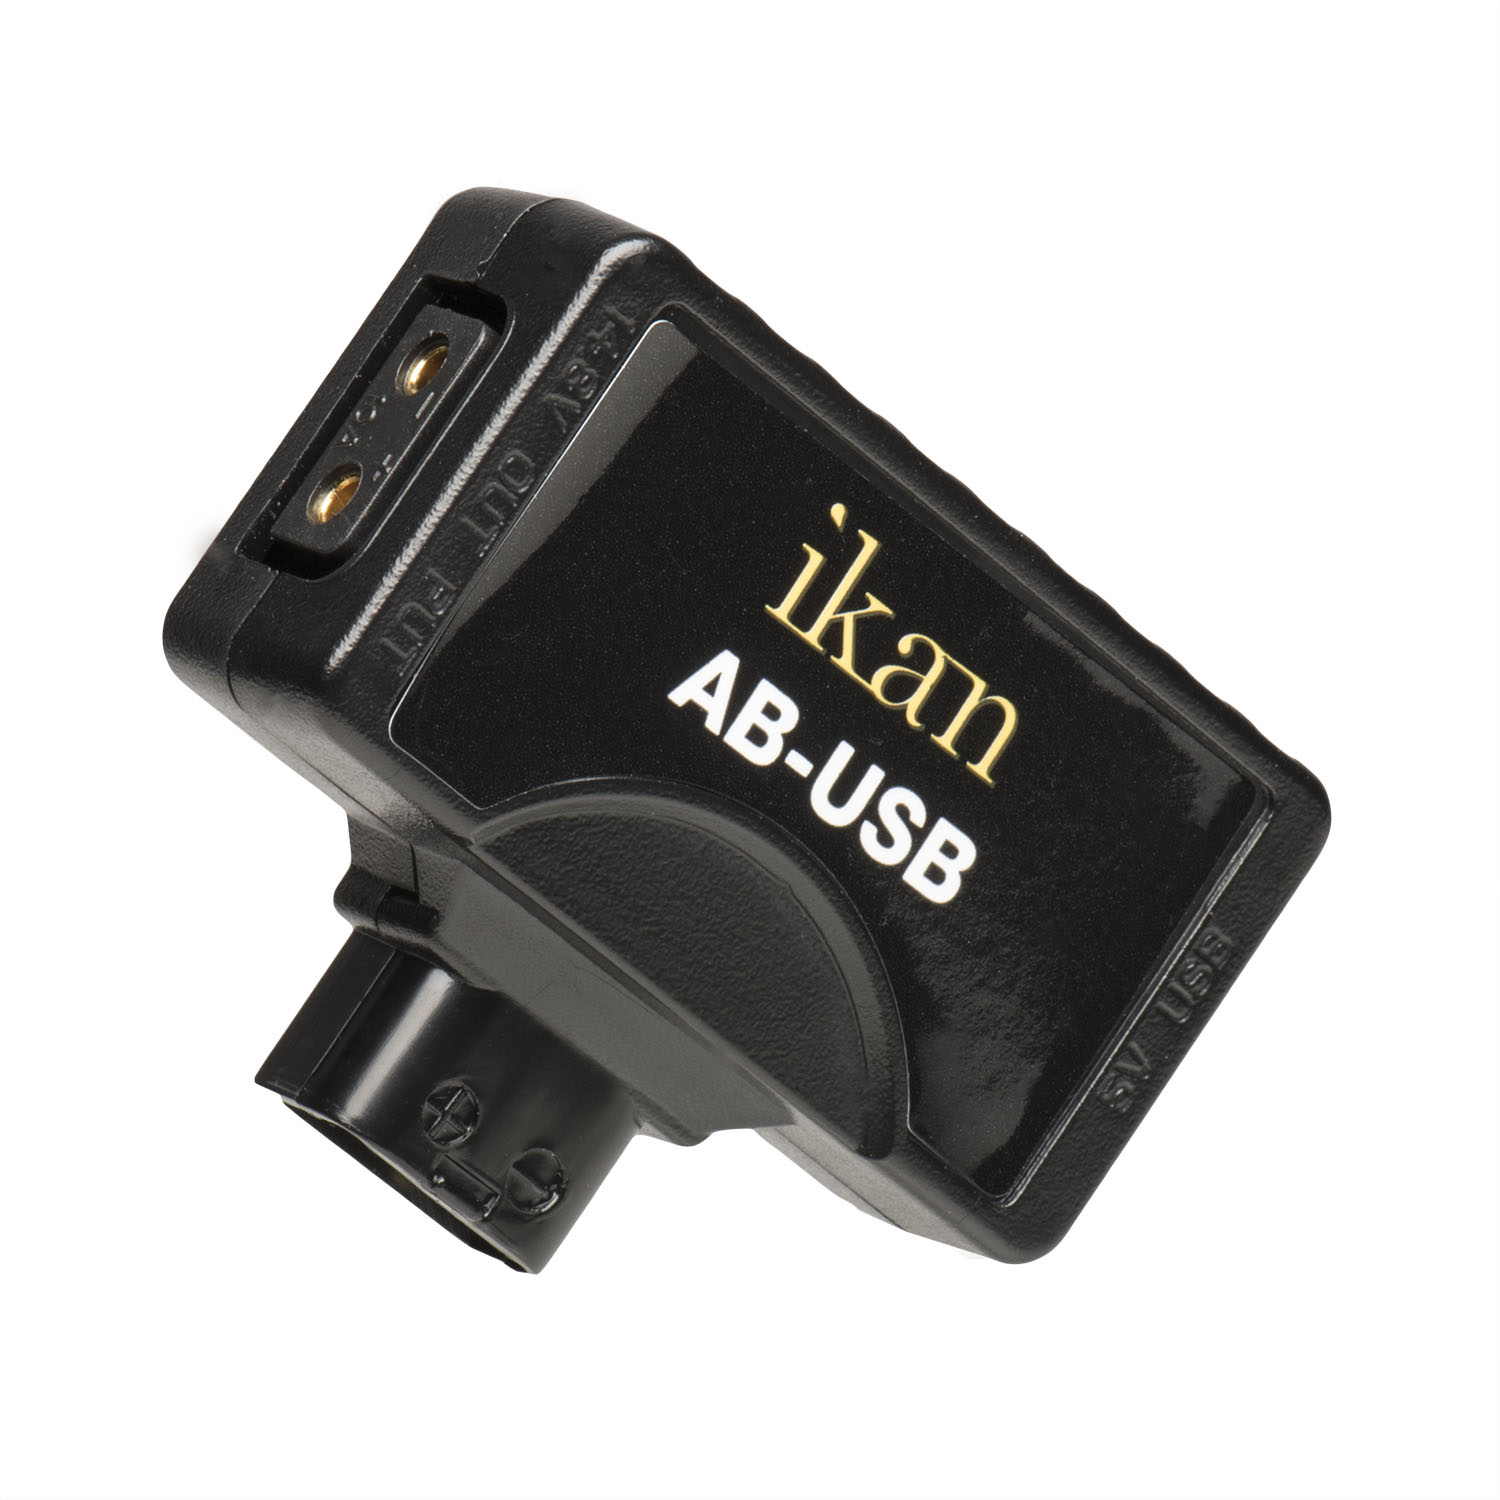 D-Tap (P-Tap) to USB Adapter for Gold & V-Mount Batteries